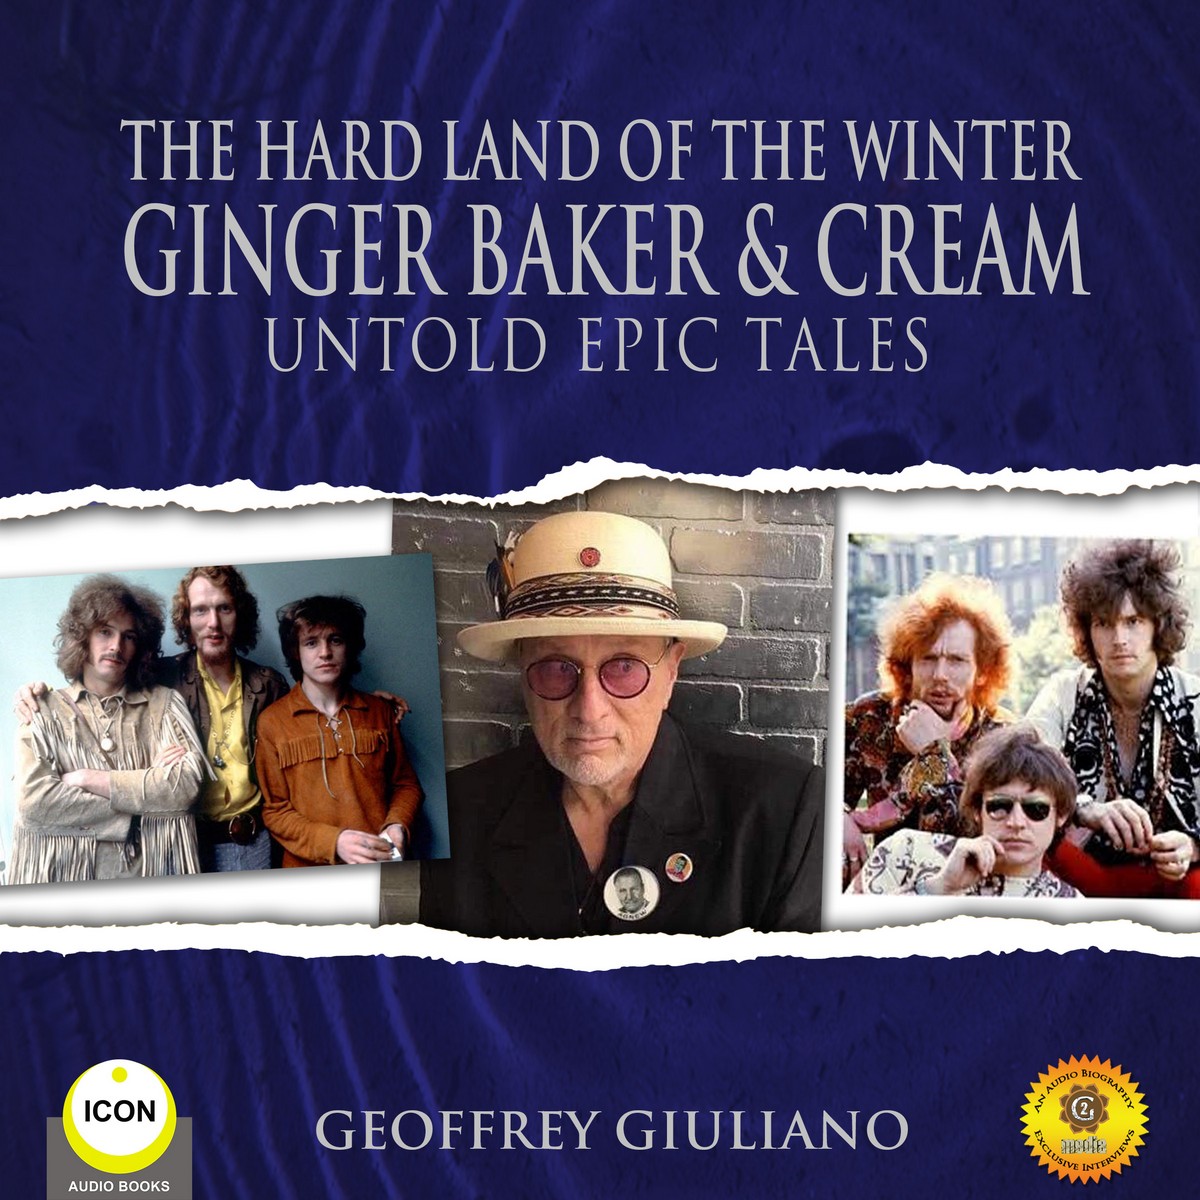 The Hard Land of The Winter Ginger Baker & Cream – Untold Epic Tales